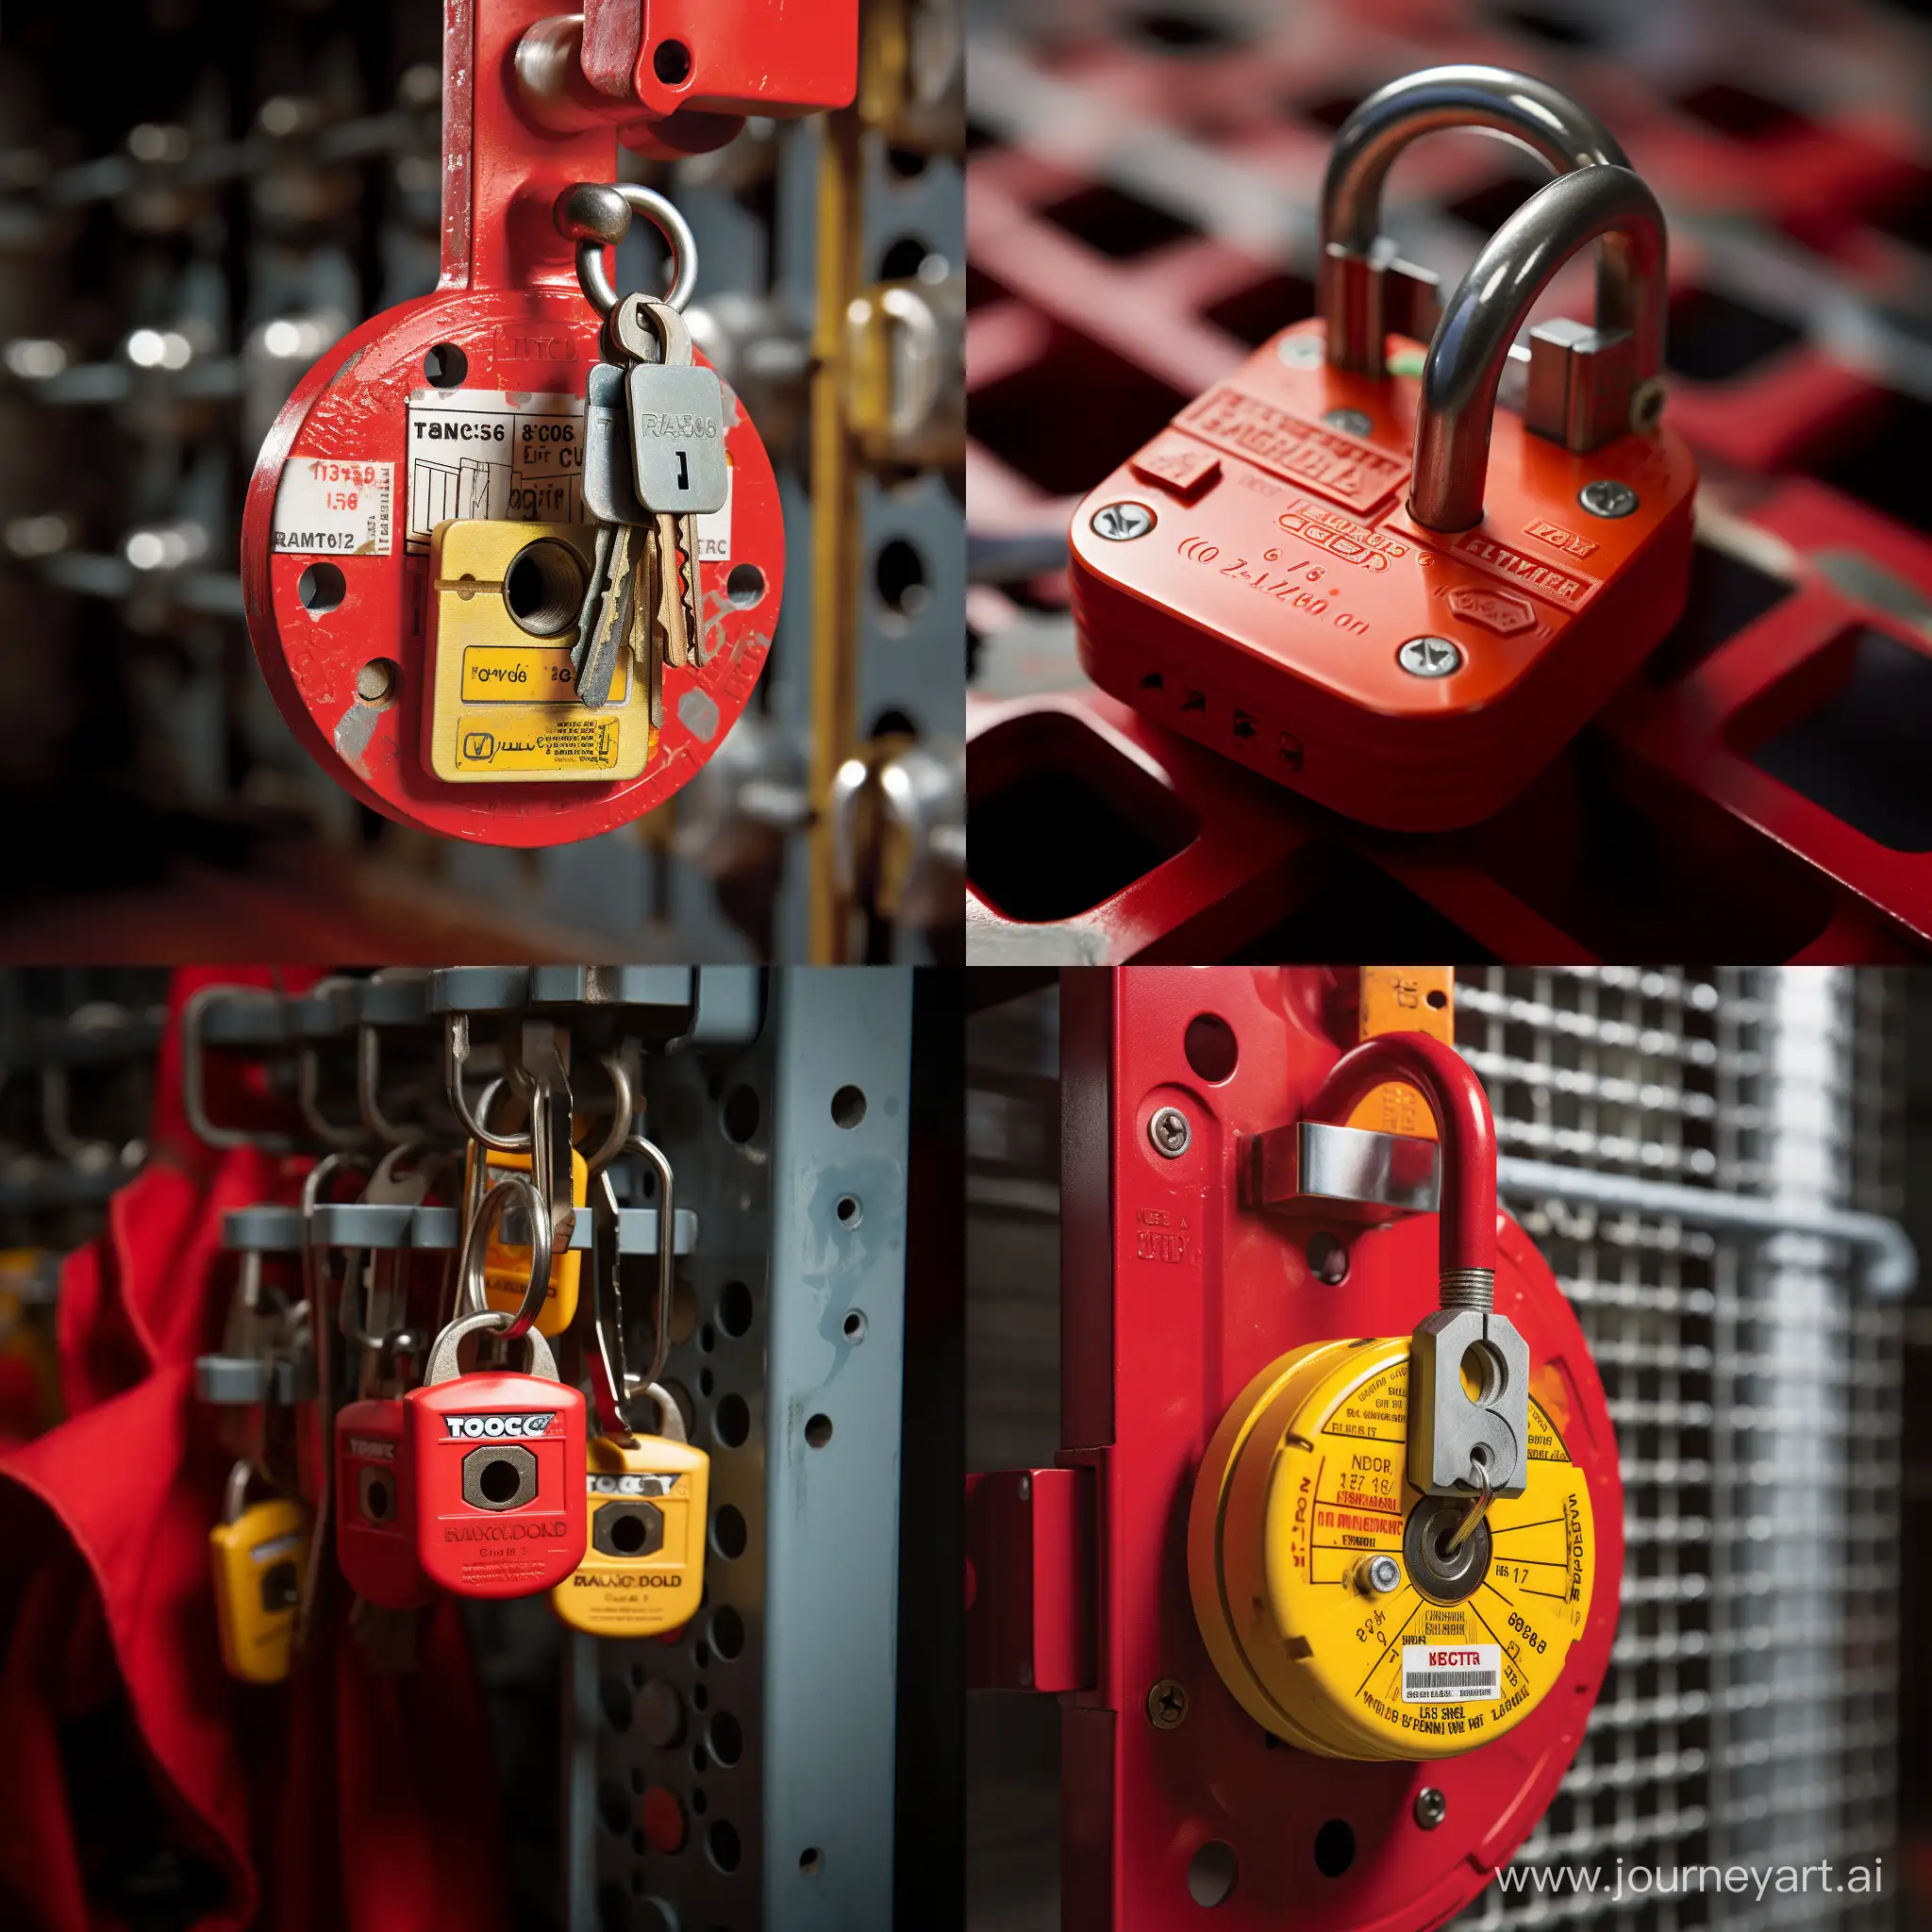 Secure-Lockout-Tagout-Equipment-Safety-Locks-for-Hazard-Prevention